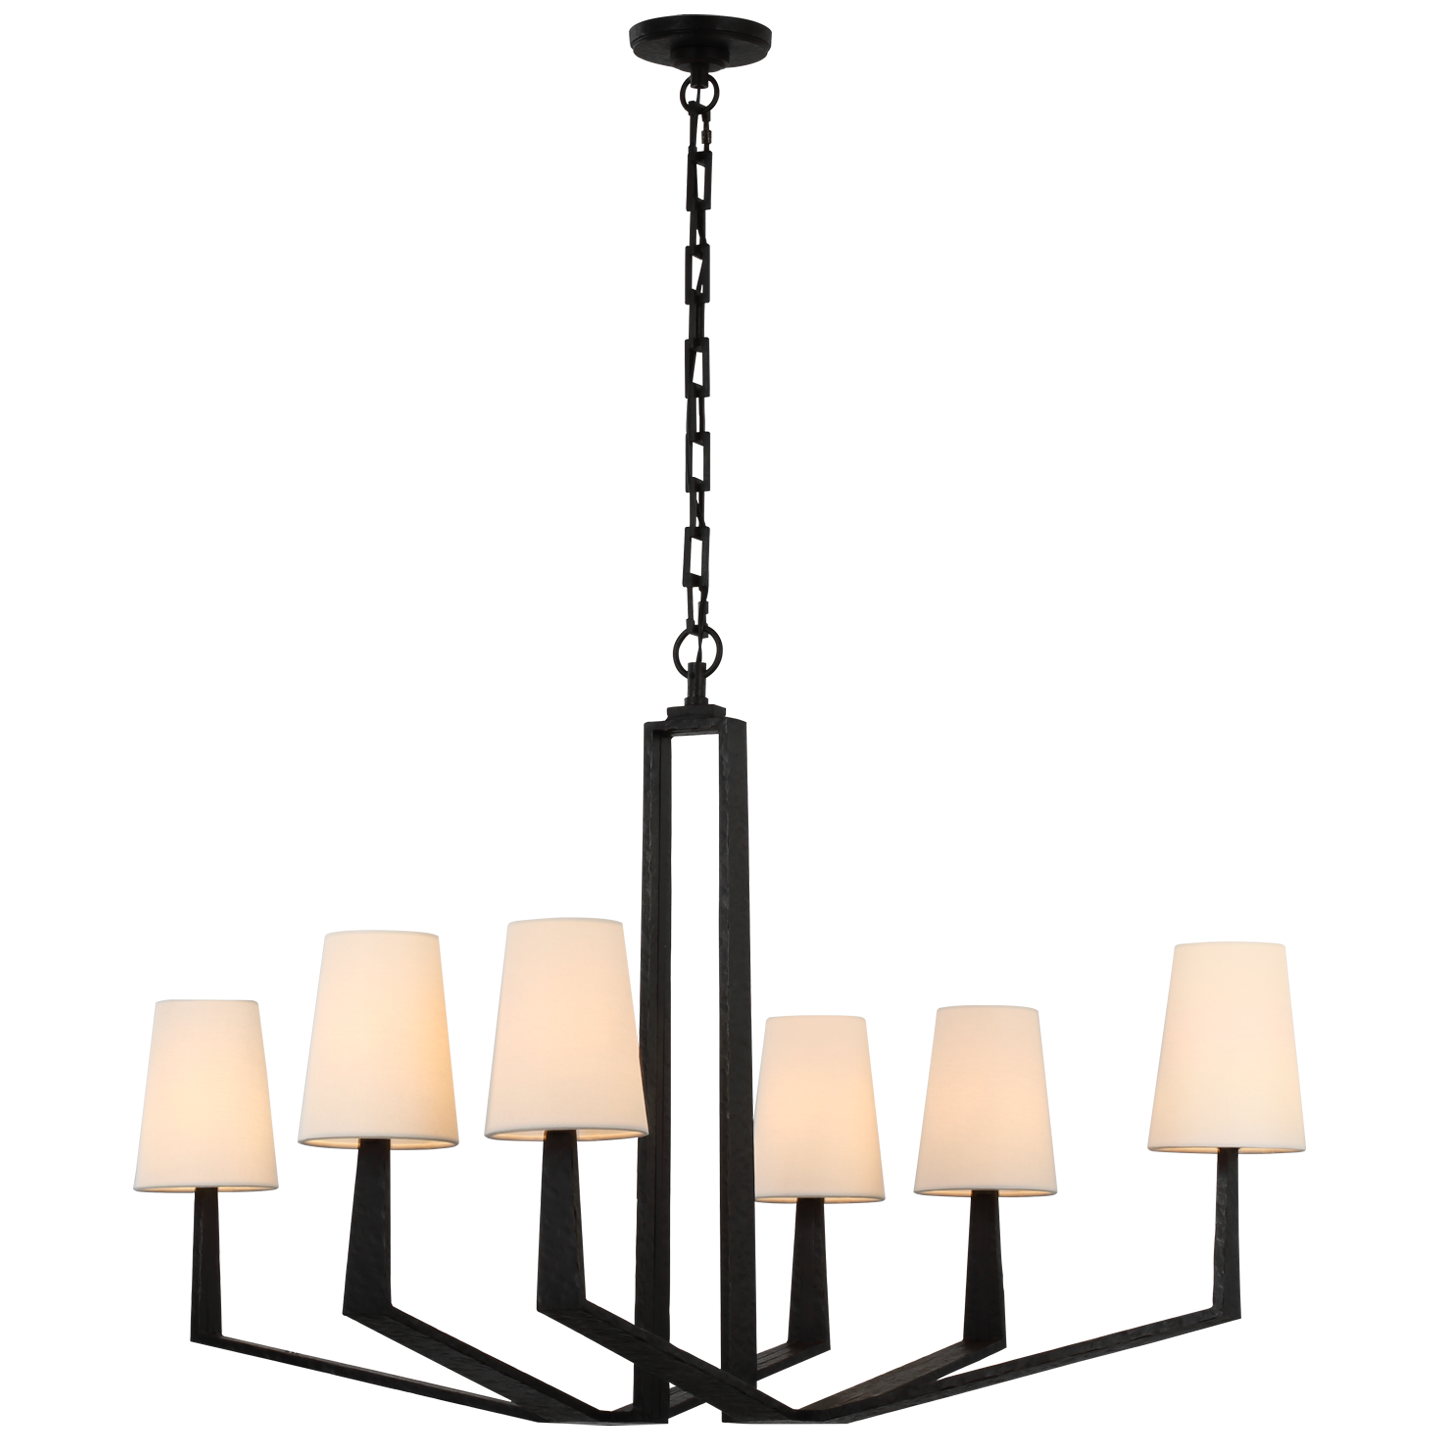 Francesco Large Chandelier in Aged Iron with Linen Shades